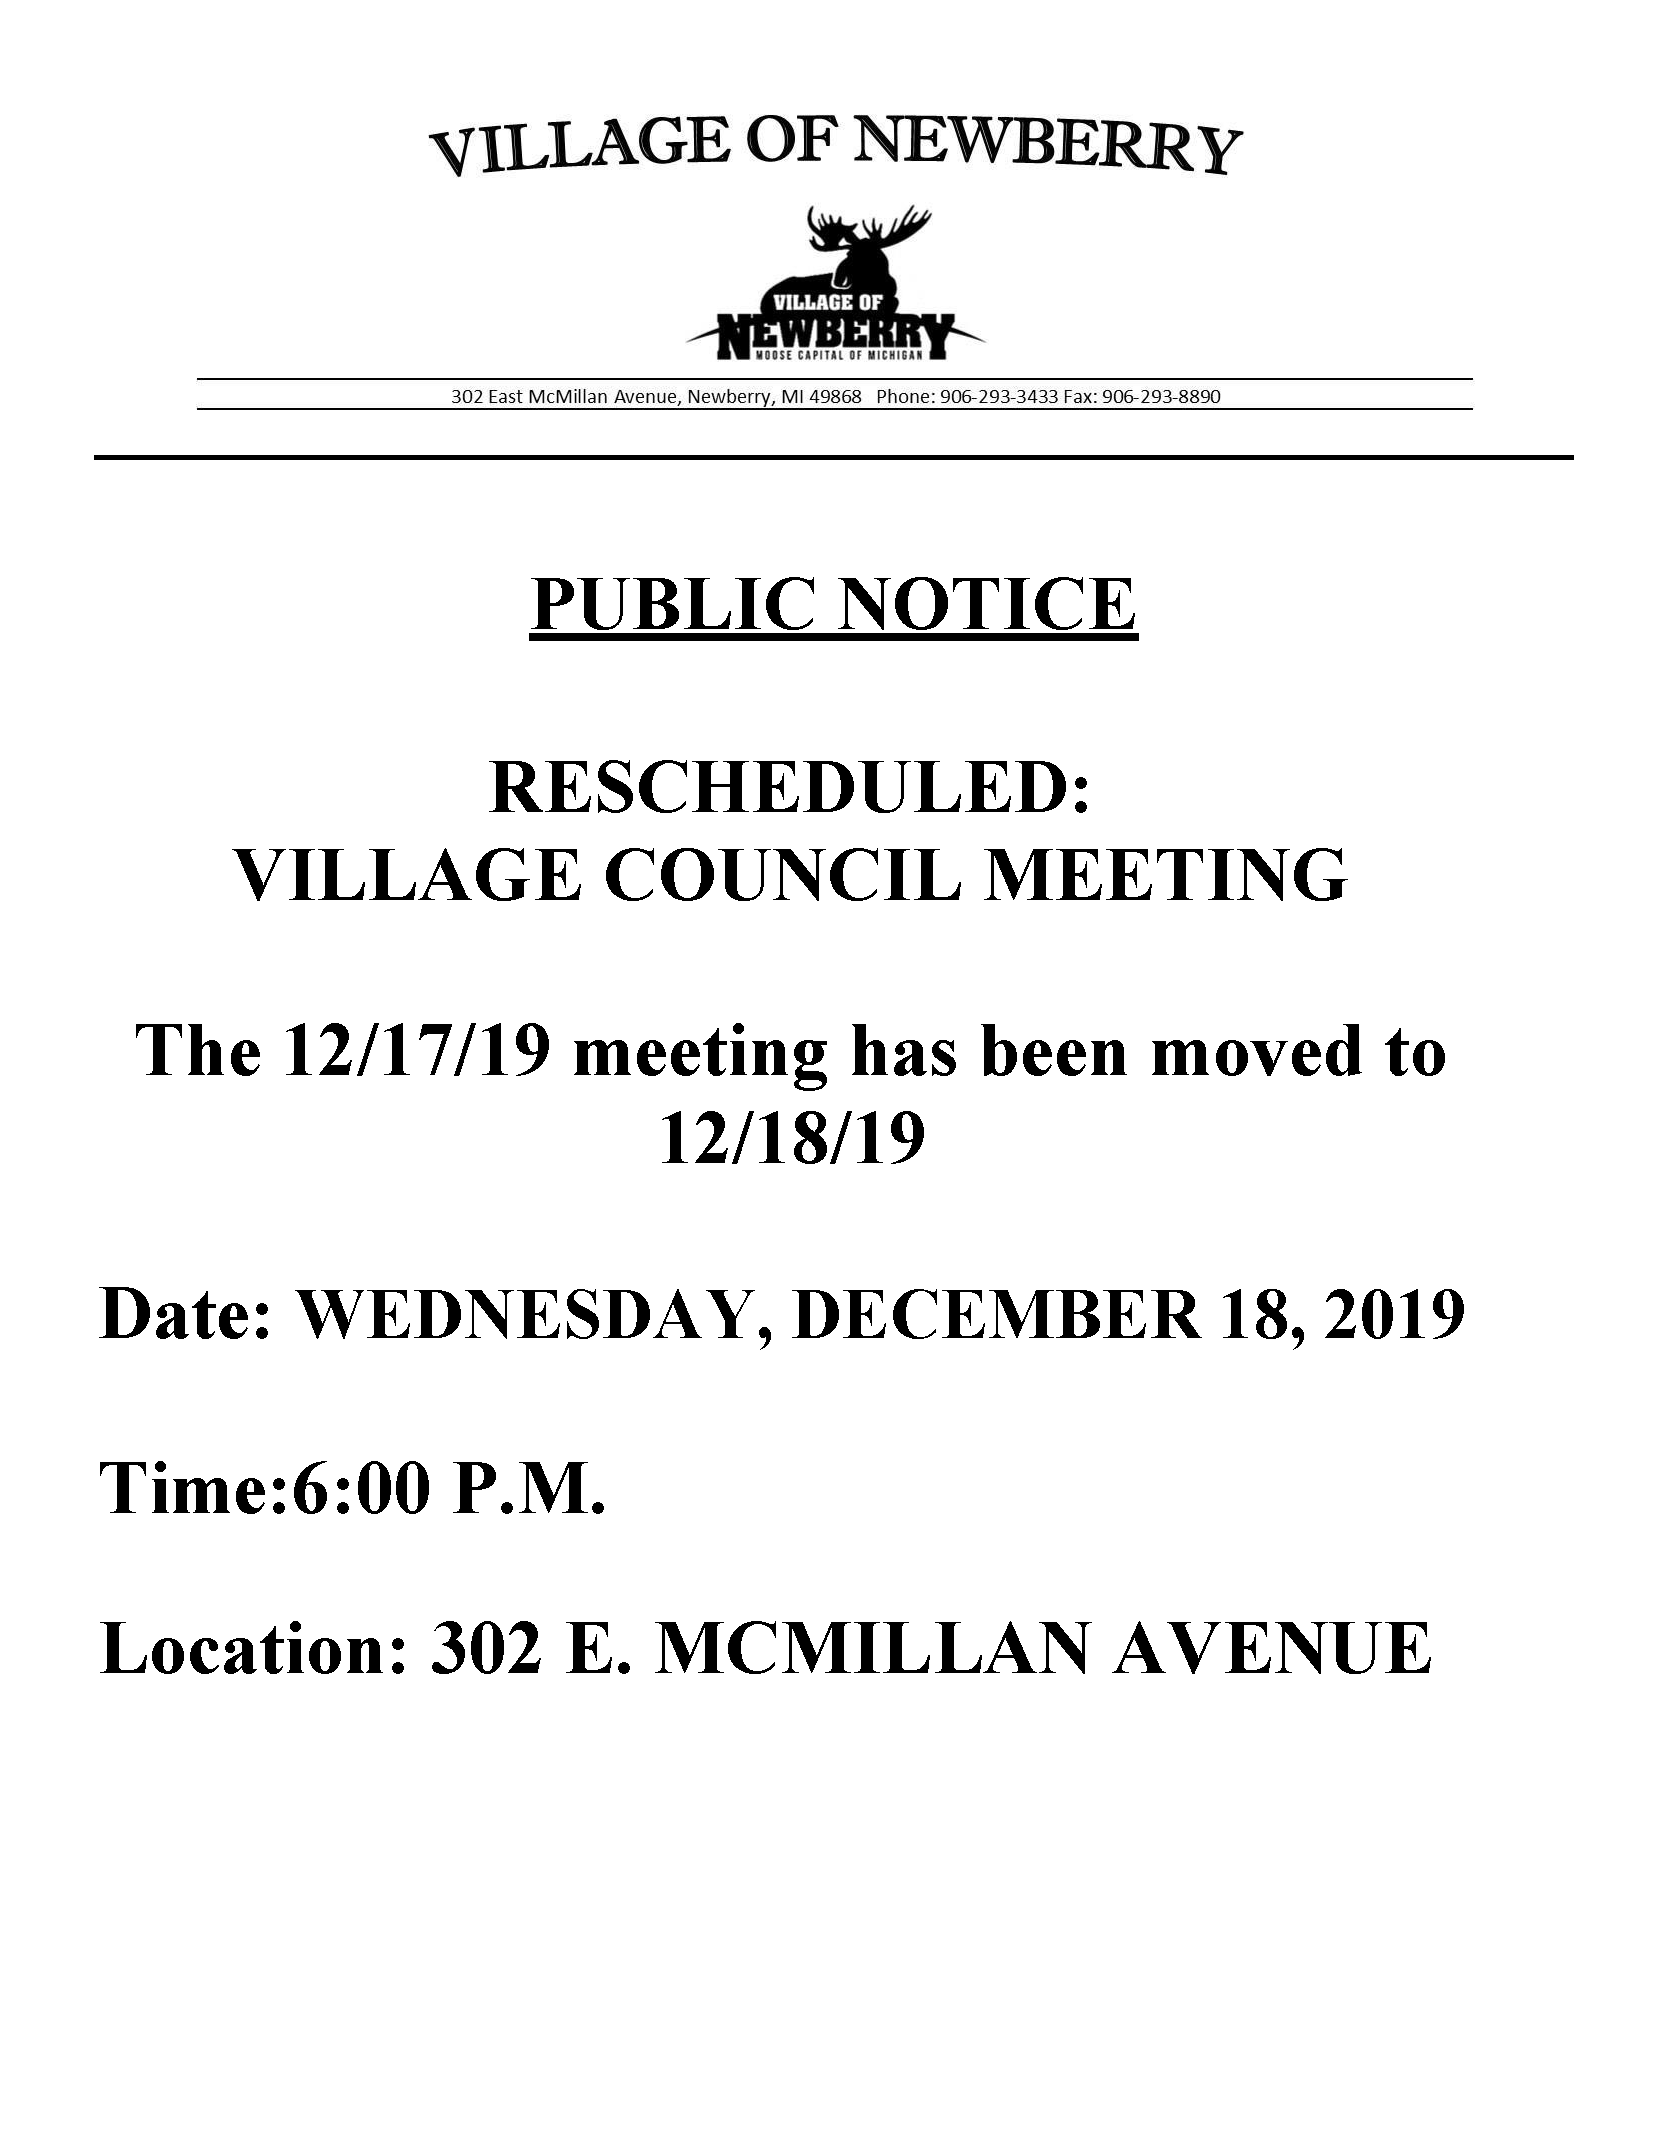 Council__Meeting_Date_Change_12.18.19